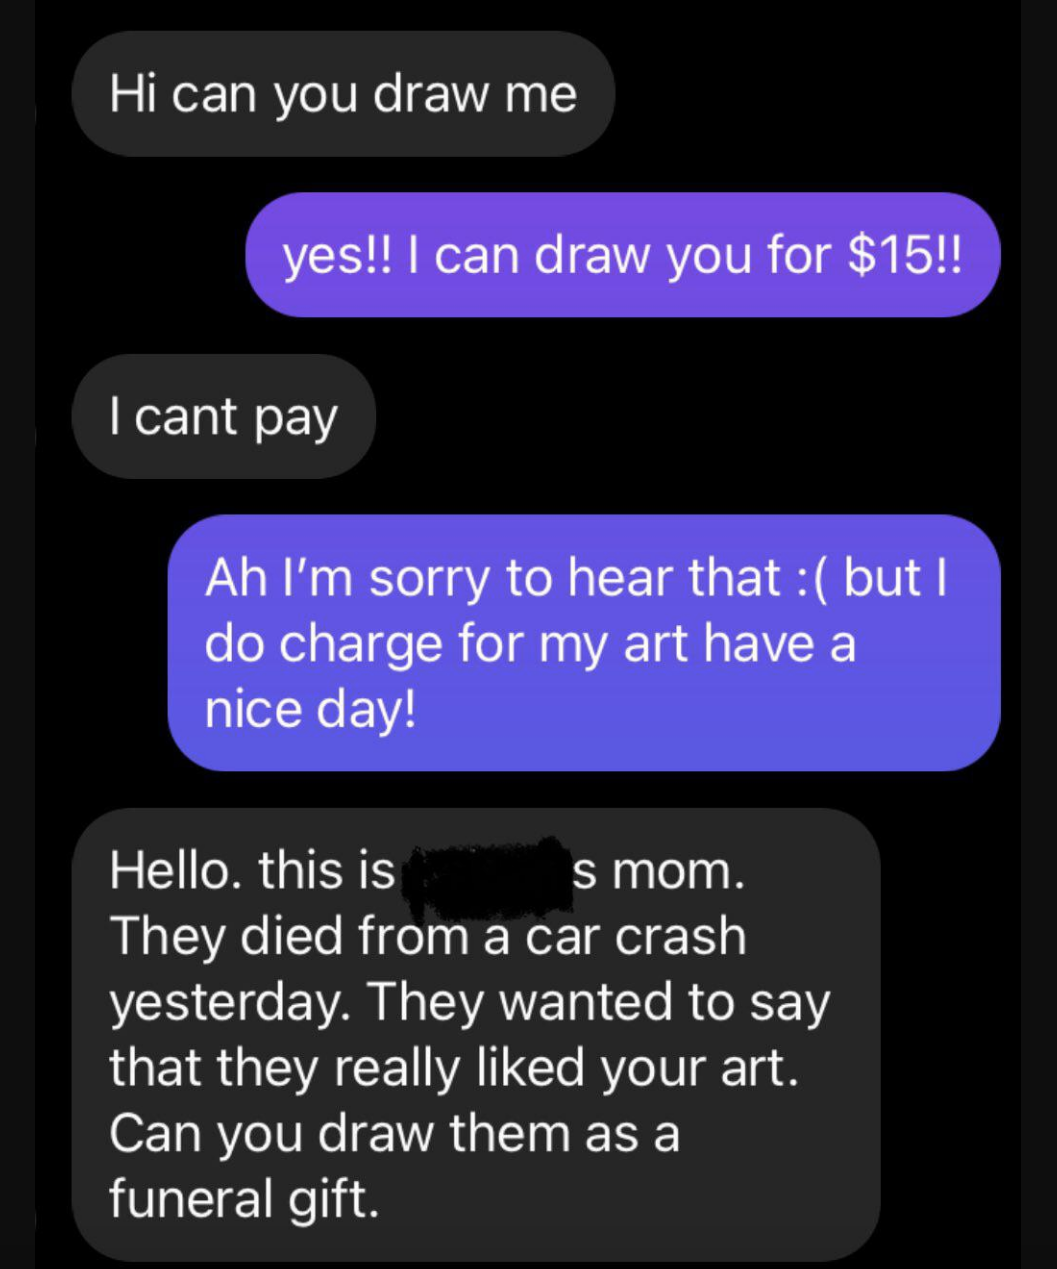 &quot;They wanted to say that they really liked your art. Can you draw them as a funeral gift.&quot;